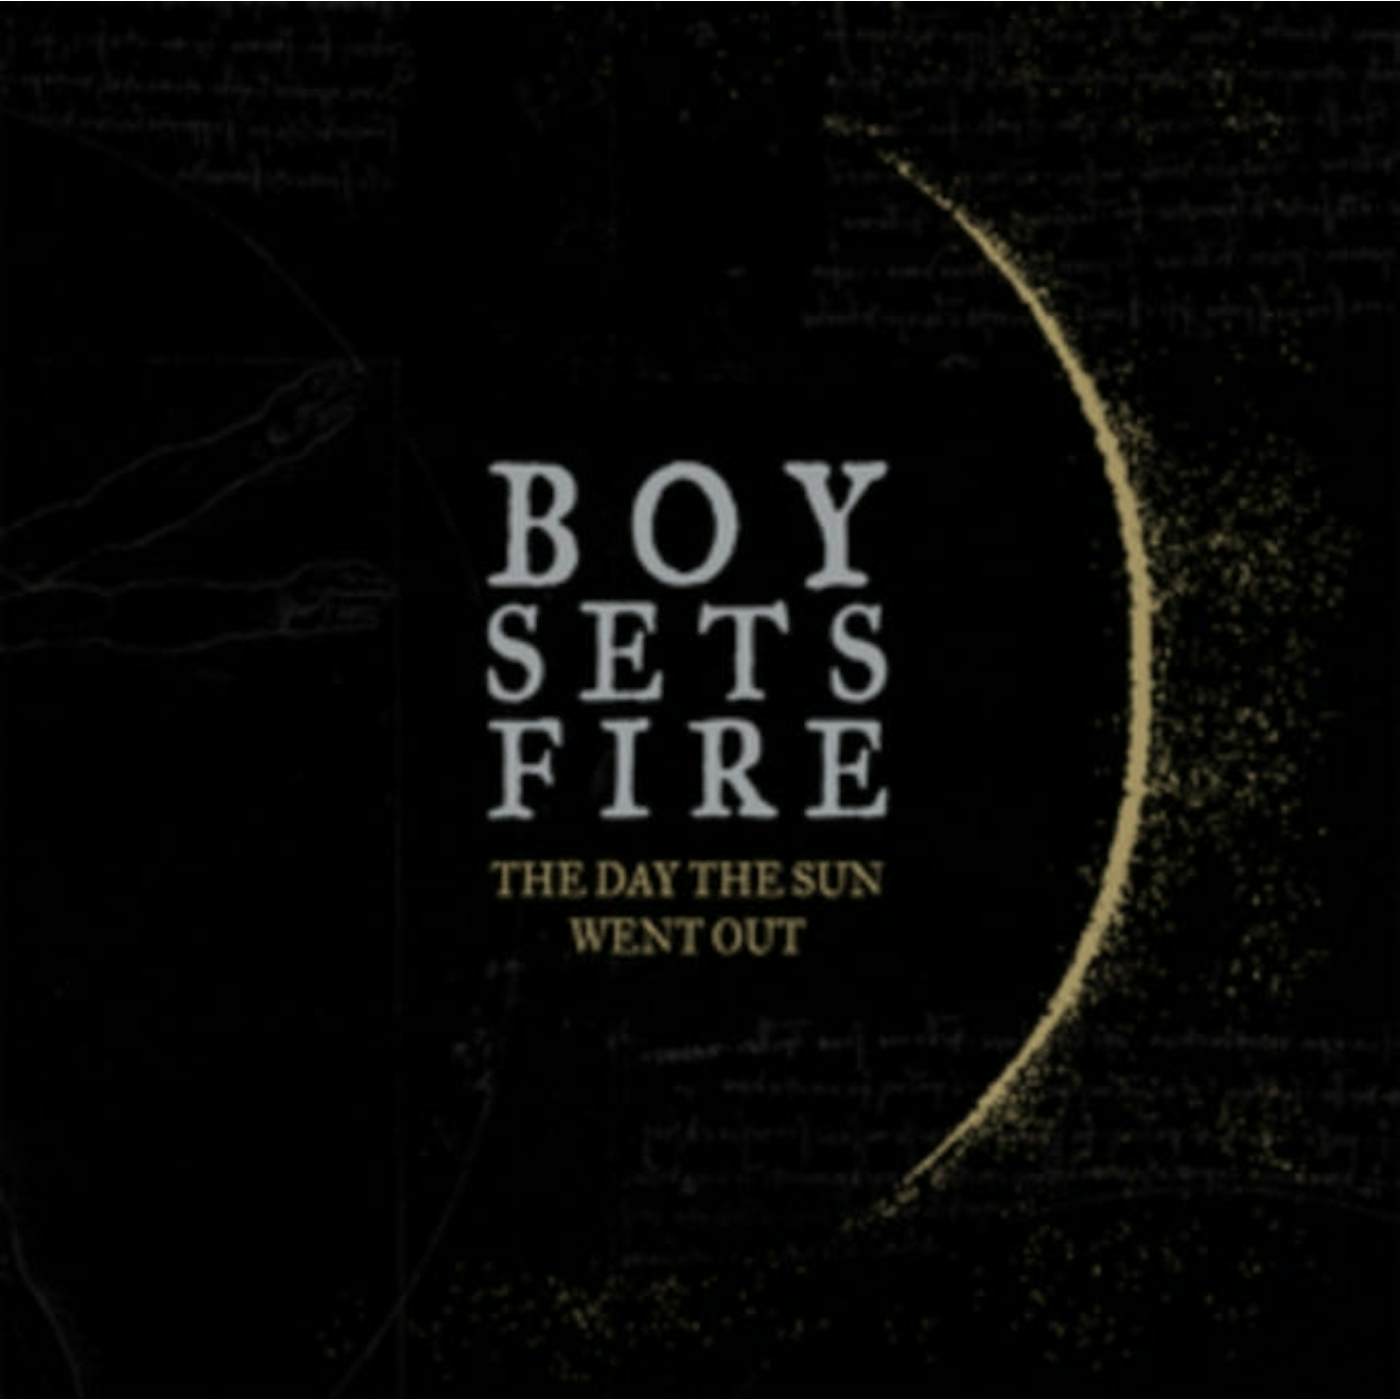 Boysetsfire LP - The Day The Sun Went Out (Remastered) (Vinyl)